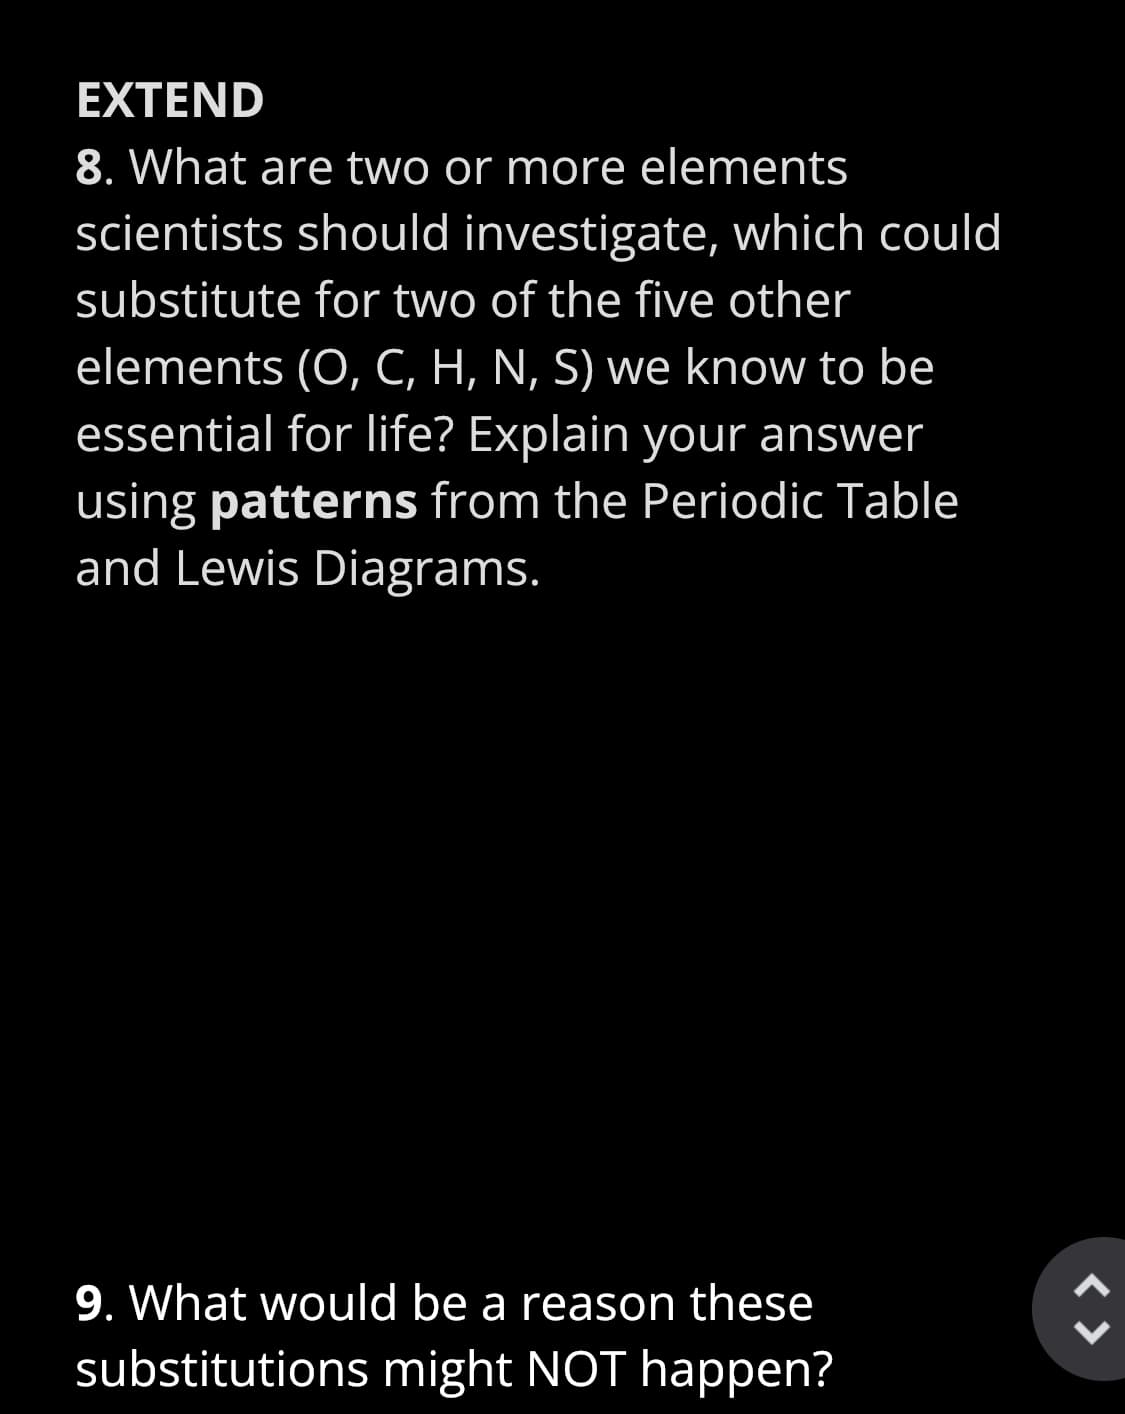 EXTEND
8. What are two or more elements
scientists should investigate, which could
substitute for two of the five other
elements (O, C, H, N, S) we know to be
essential for life? Explain your answer
using patterns from the Periodic Table
and Lewis Diagrams.
9. What would be a reason these
substitutions might NOT happen?
